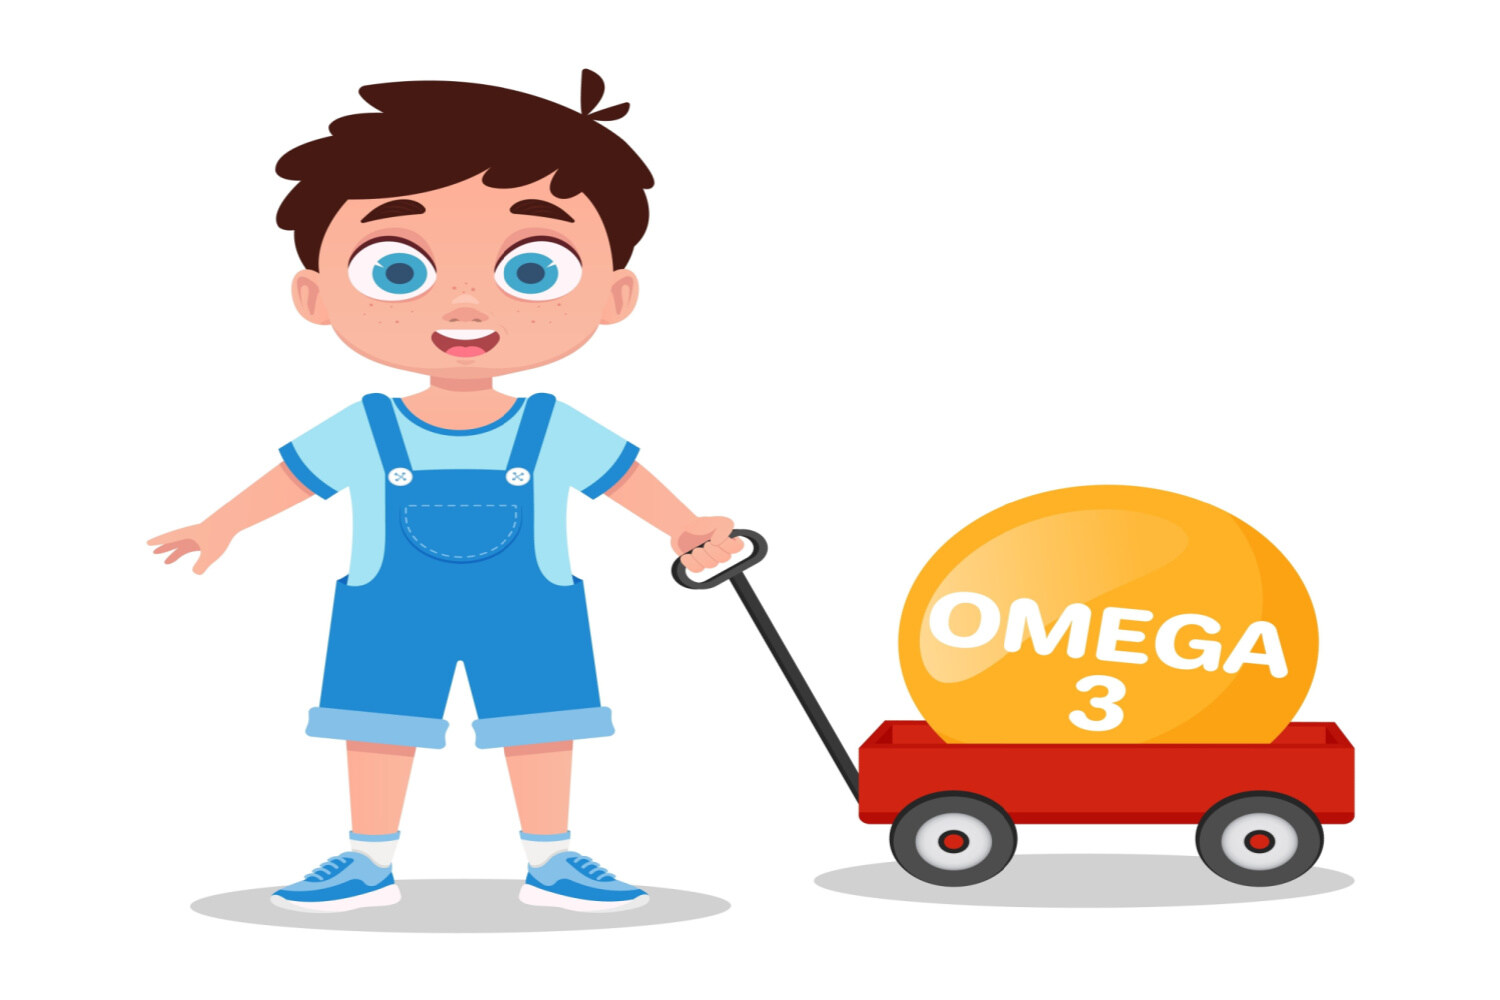 Omega-3 fatty acids for toddlers